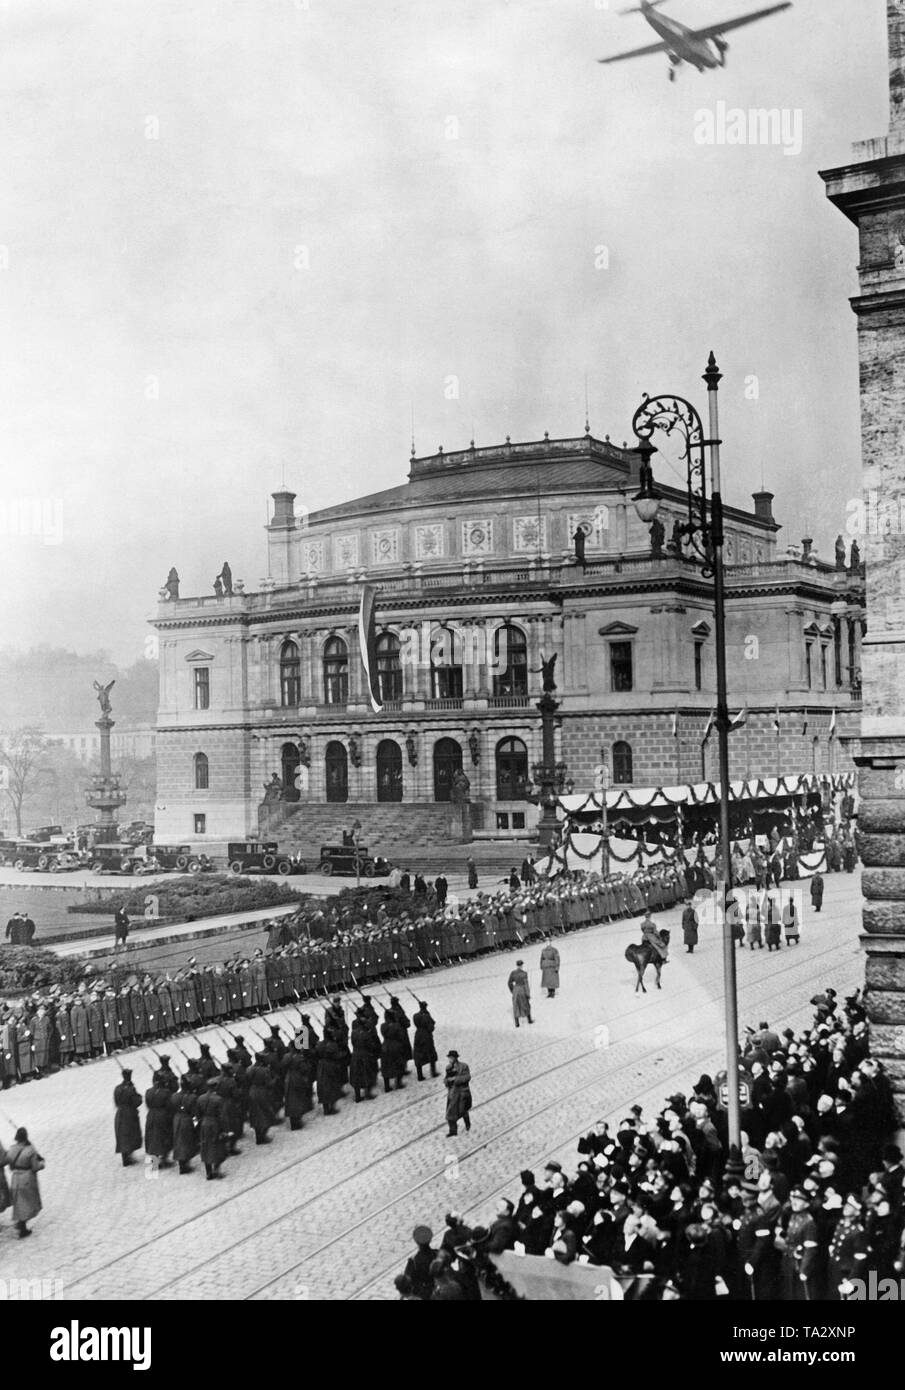 Parade of the garrison on the occasion of the 15th anniversary of the founding of the Czechoslovak Republic in Prague. President Tomas Garrigue Masaryk welcomes the parade on the tribune (r.) at the parliament of the Czech Republic. Stock Photo